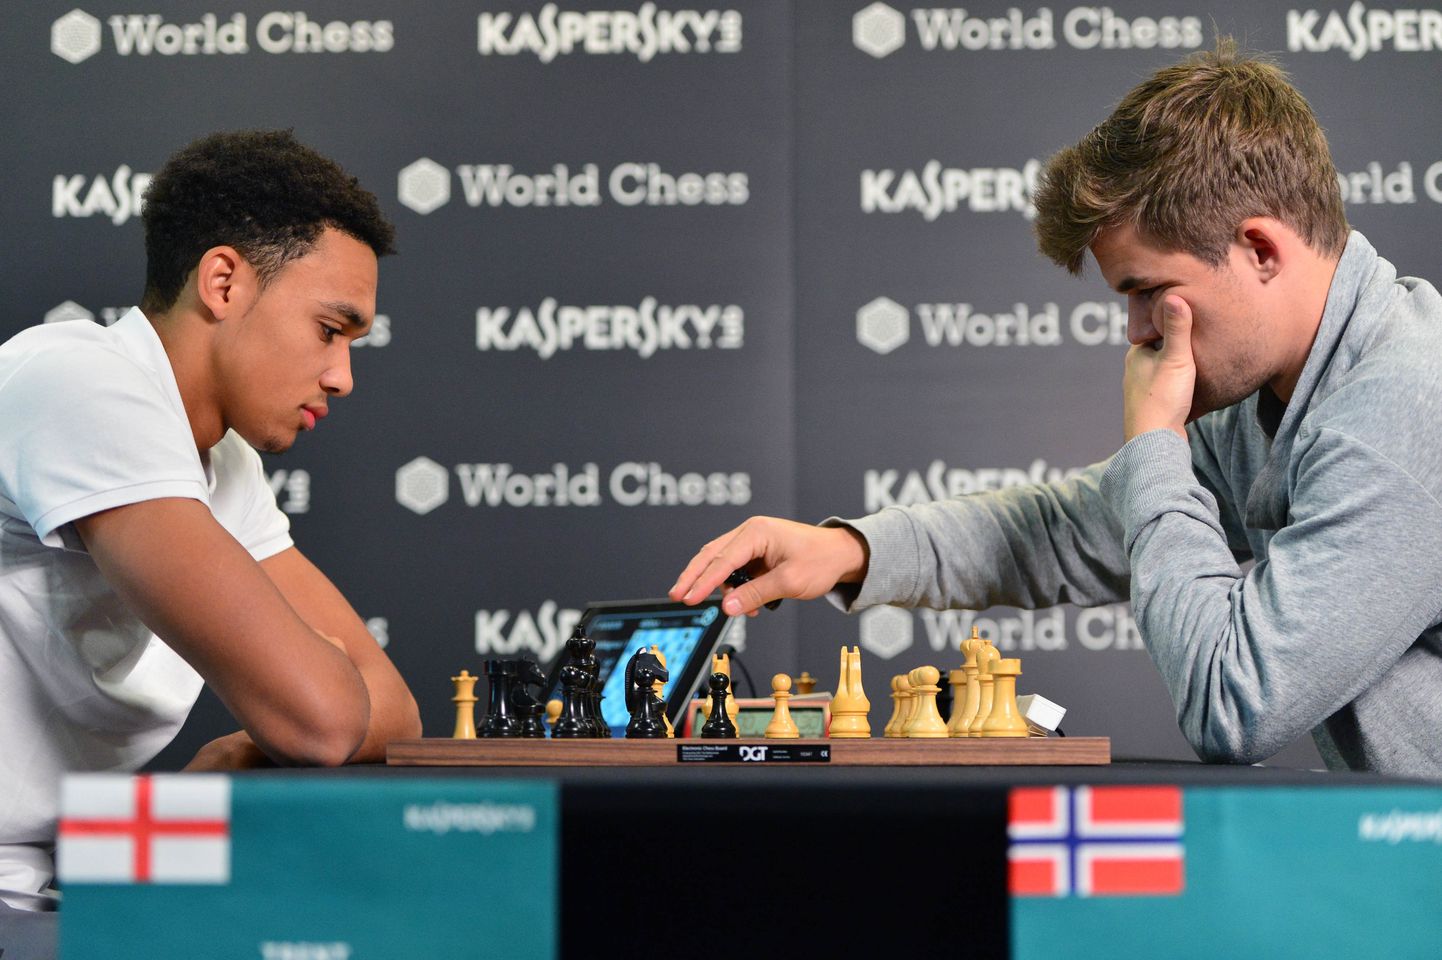 EDITORIAL USE ONLY
Liverpool and England's Trent Alexander-Arnold (left) competes against World Chess Champion Magnus Carlsen in a match organised by Kaspersky Lab at the Radisson Blu hotel in Manchester.